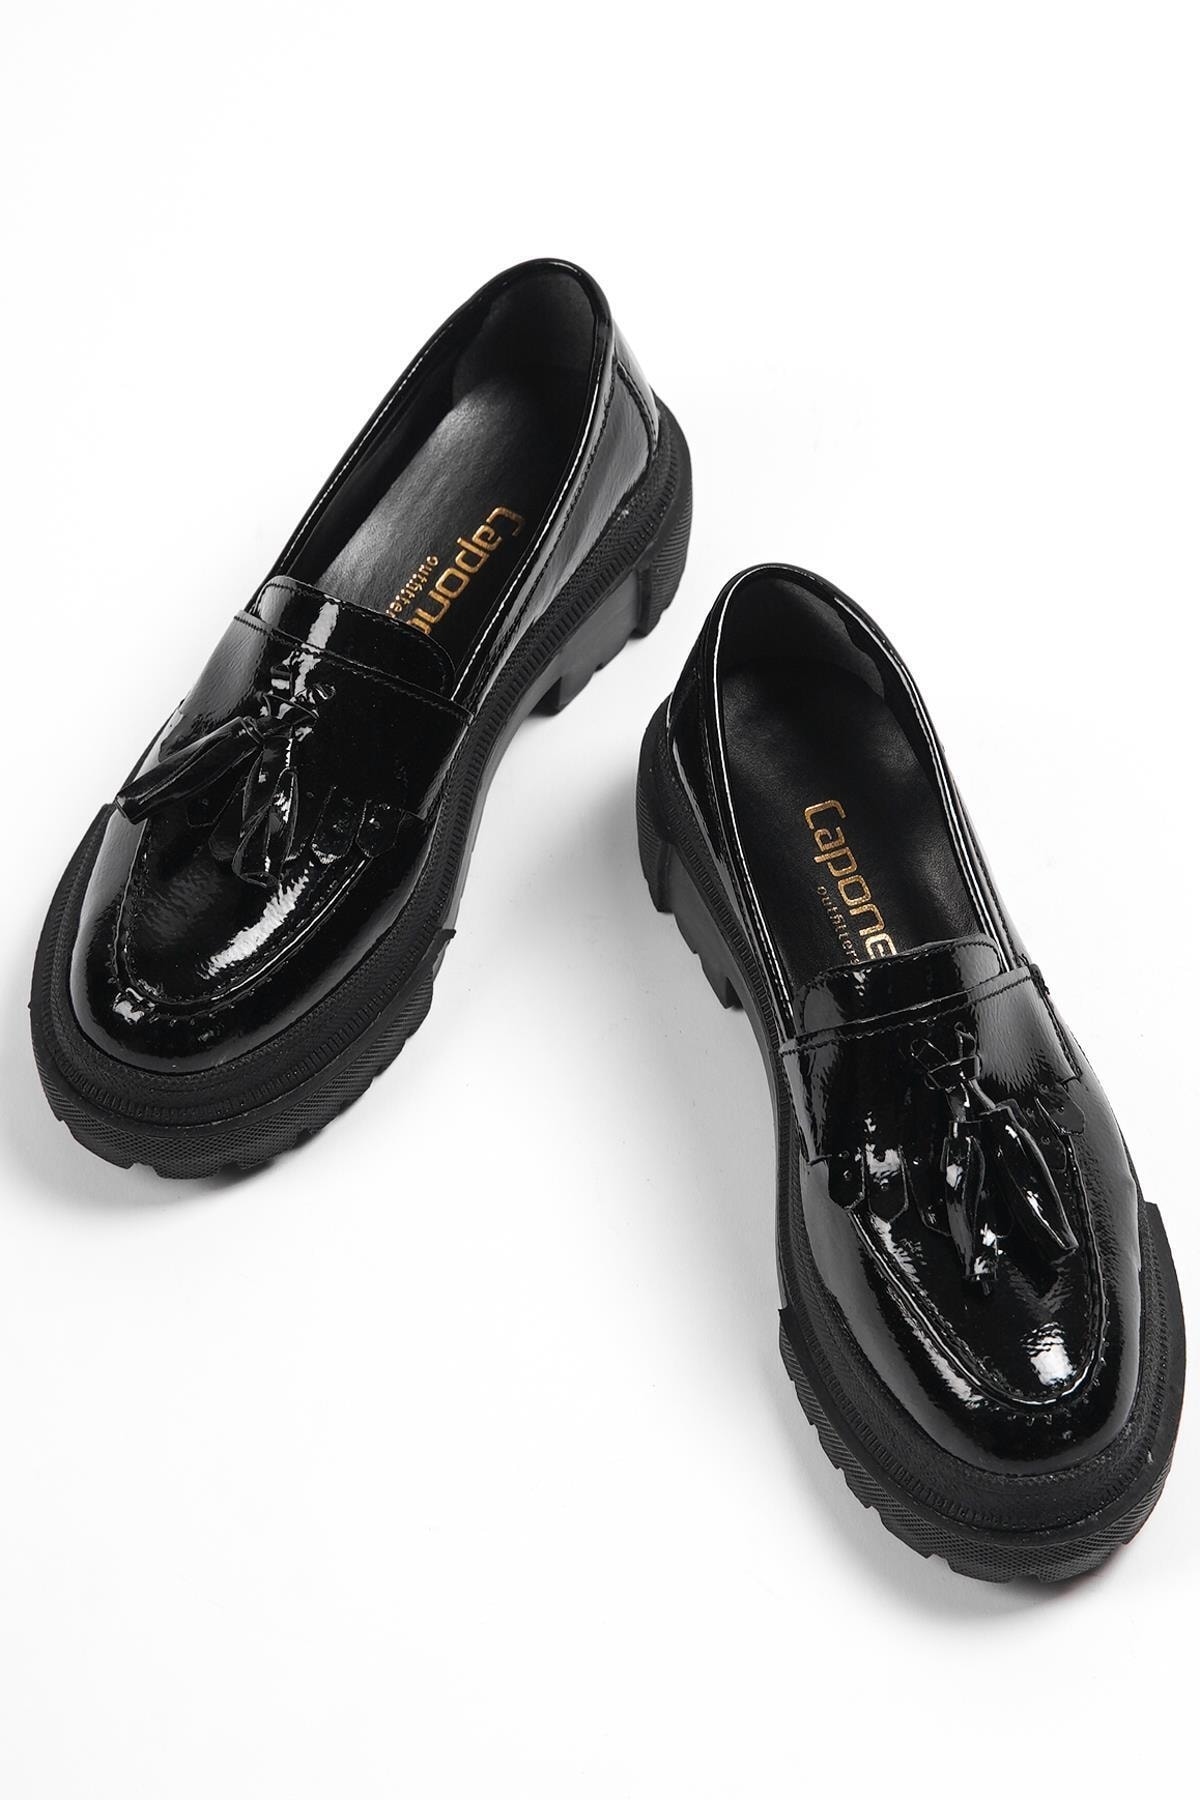 Capone Outfitters Loafer Shoes - Black - Flat